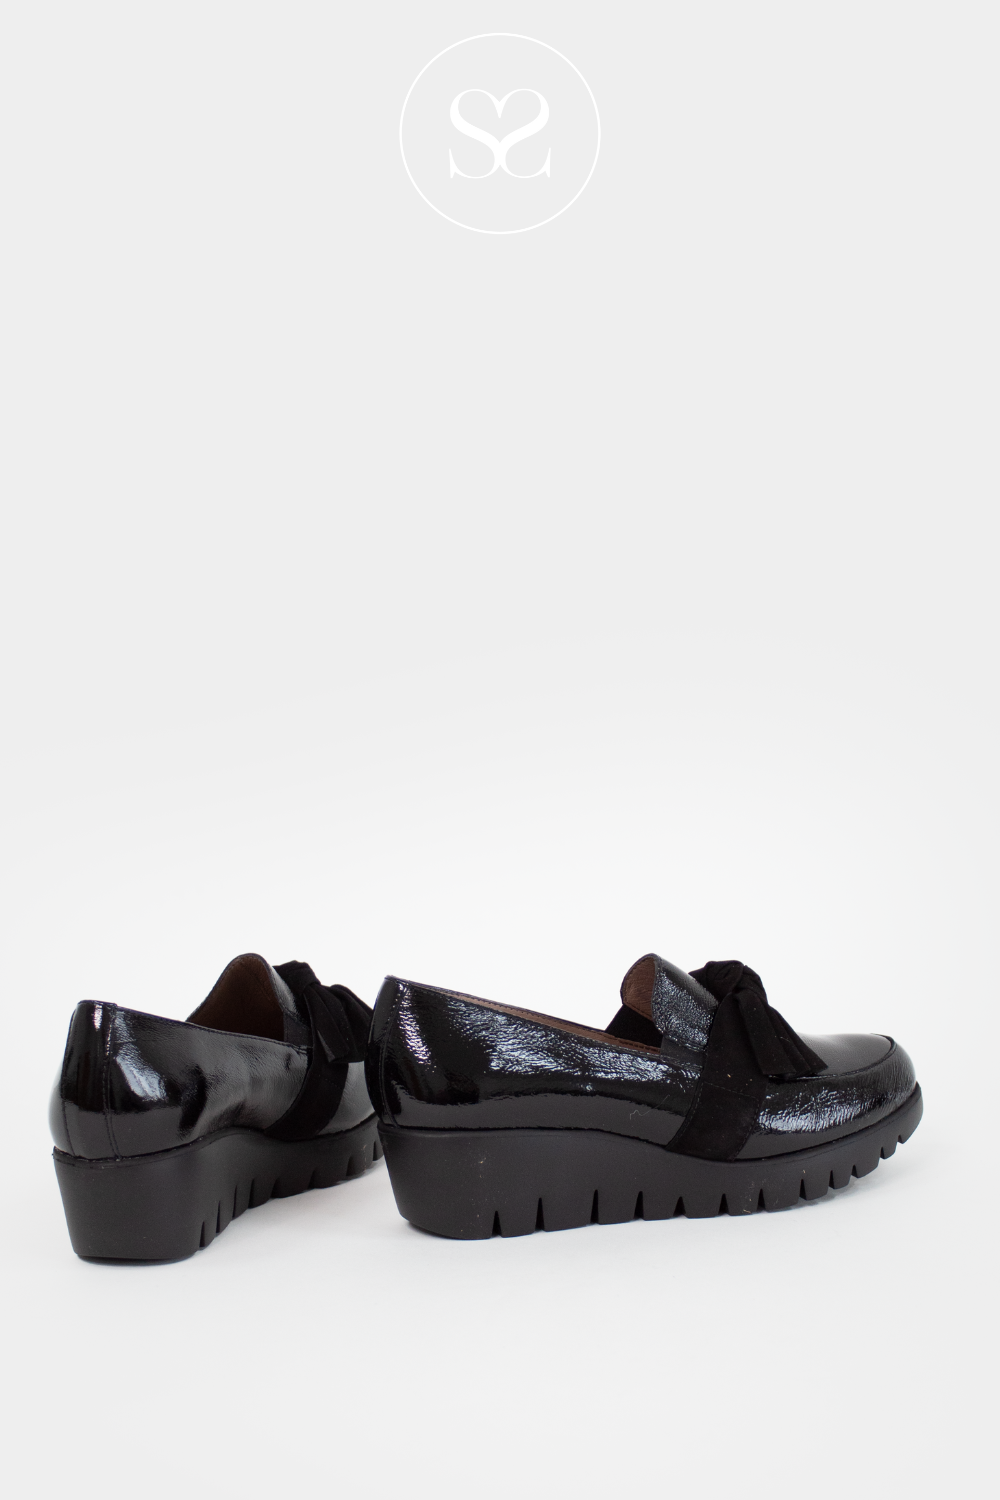 WONDERS C-33323 BLACK PATENT LEATHER WEDGE LOAFERS